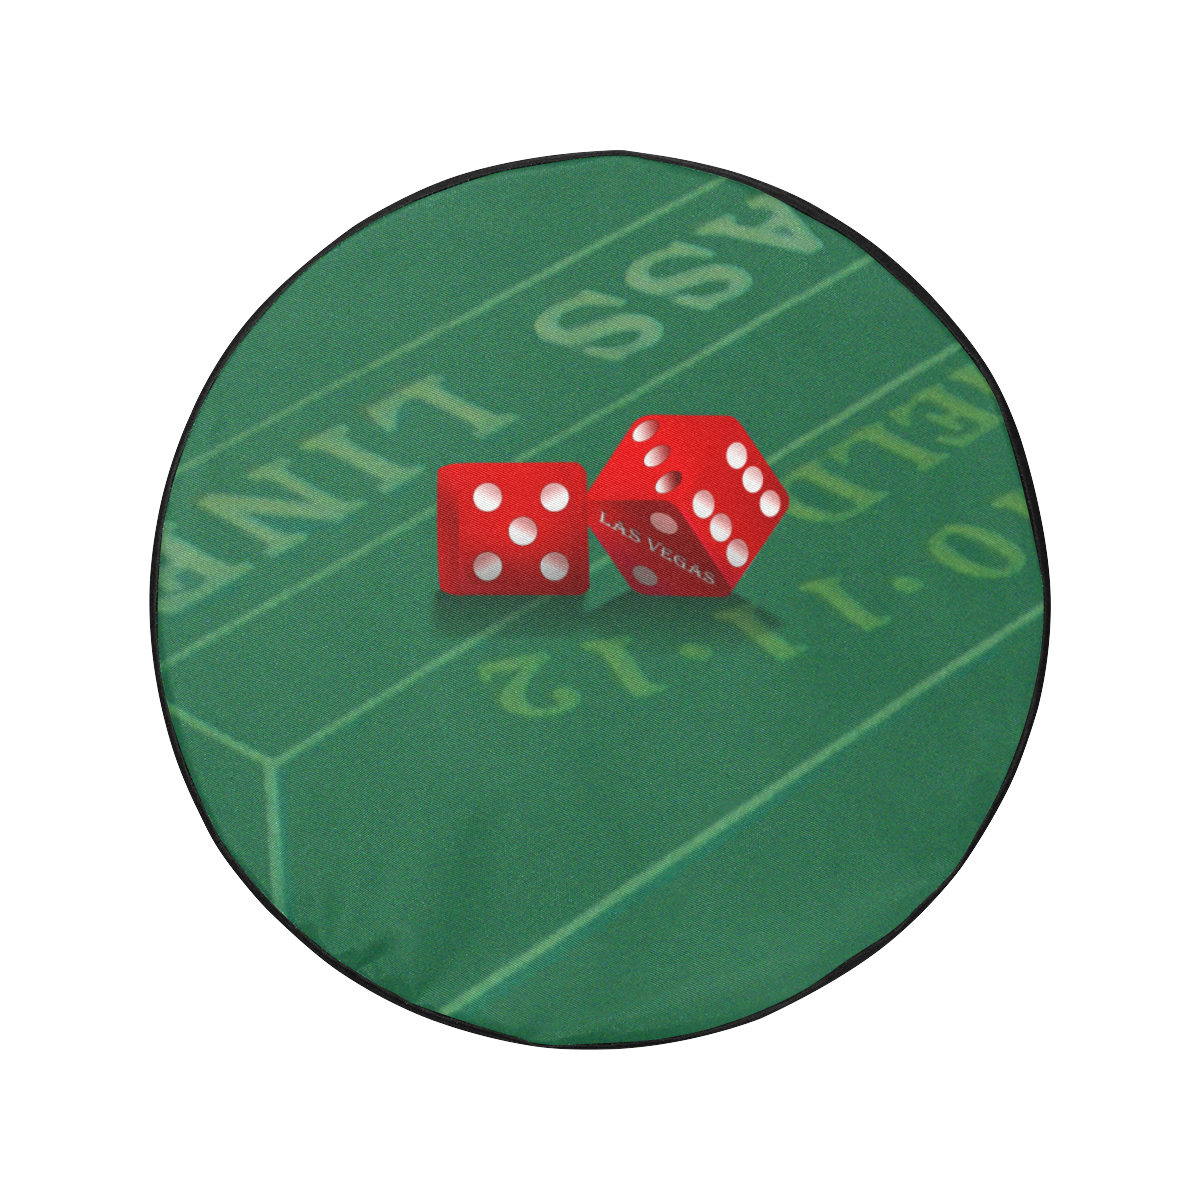 Las Vegas Dice on Craps Table 34 Inch Spare Tire Cover